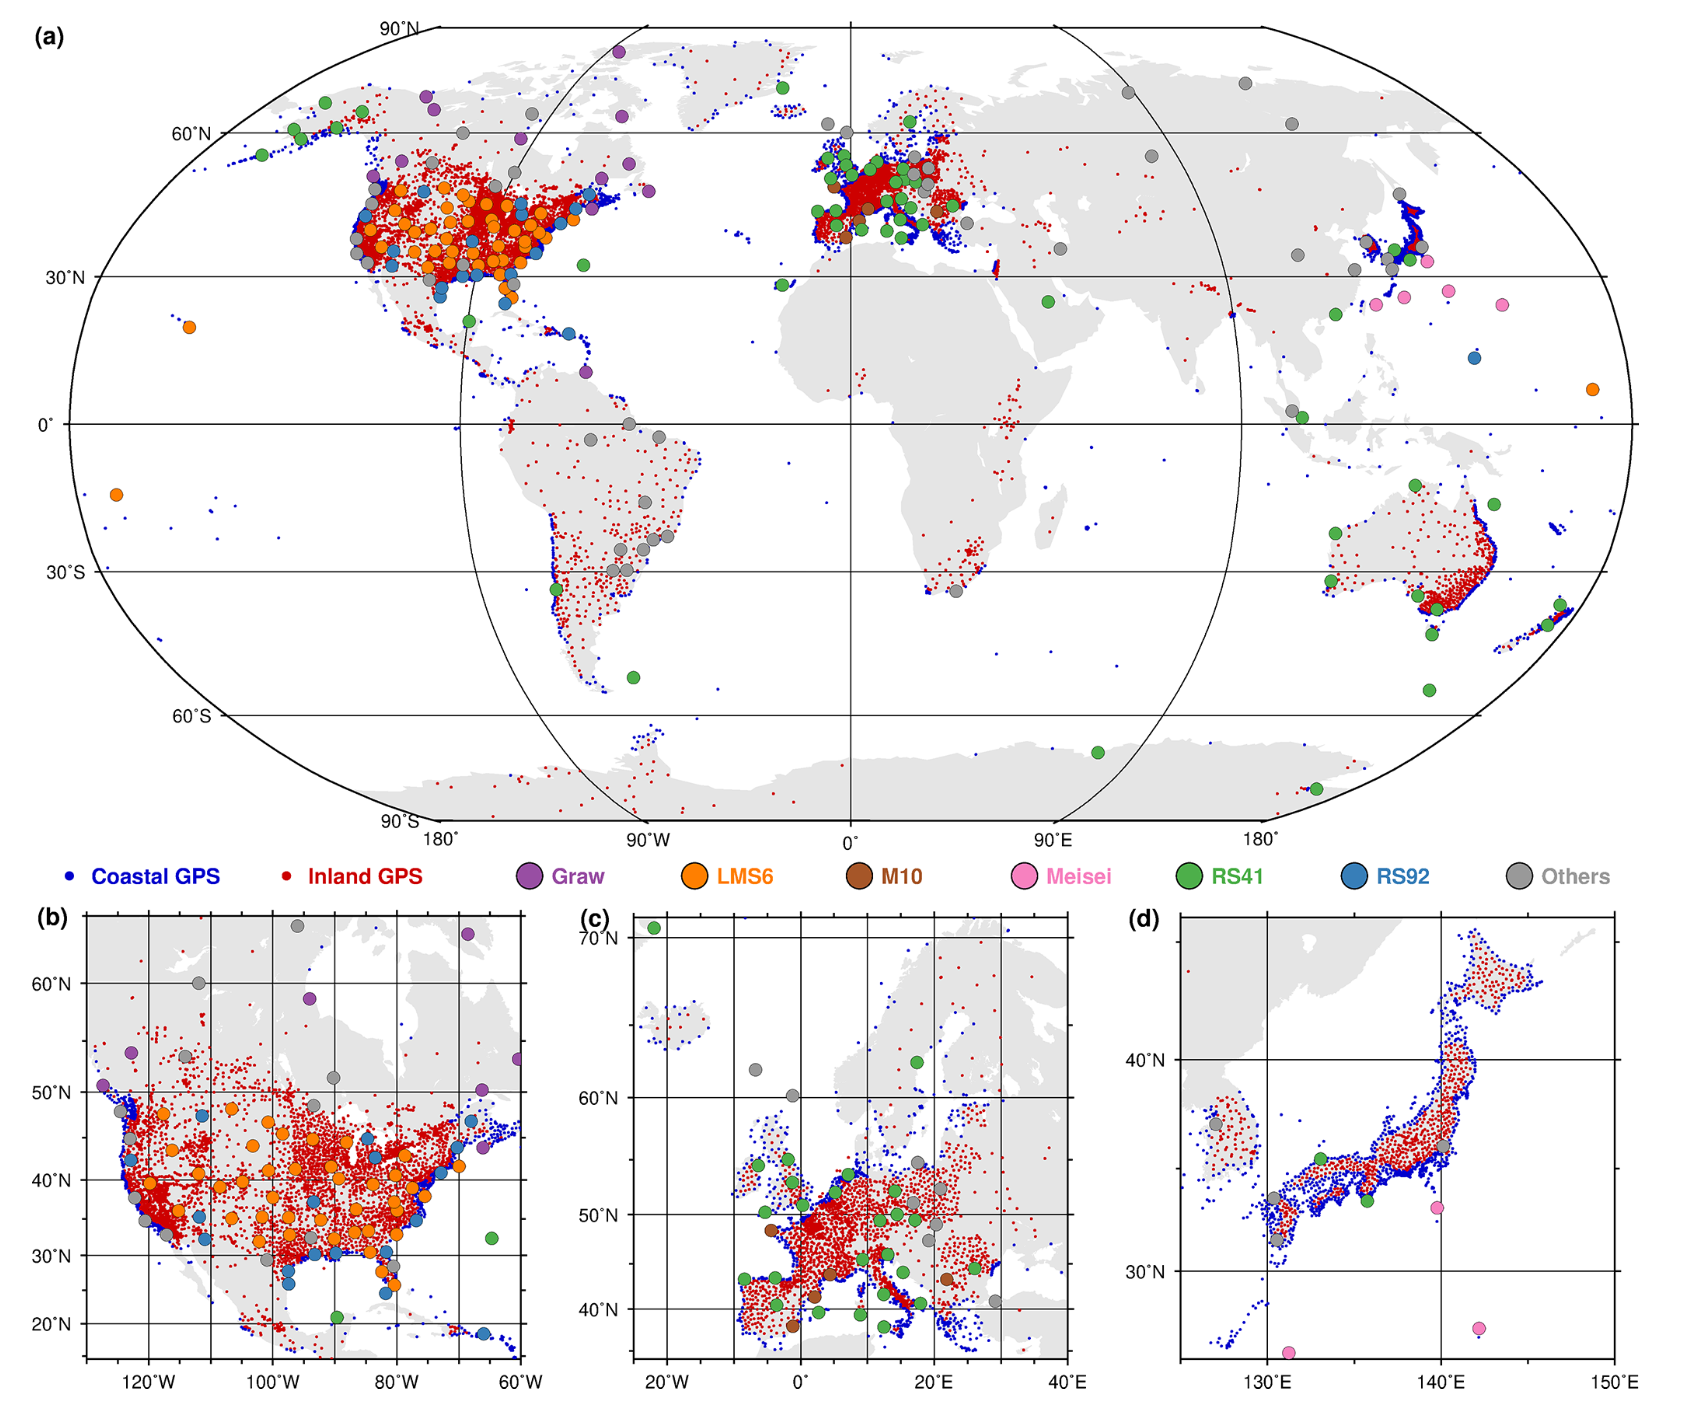 Global GPS and Radiosonde stations used in the study